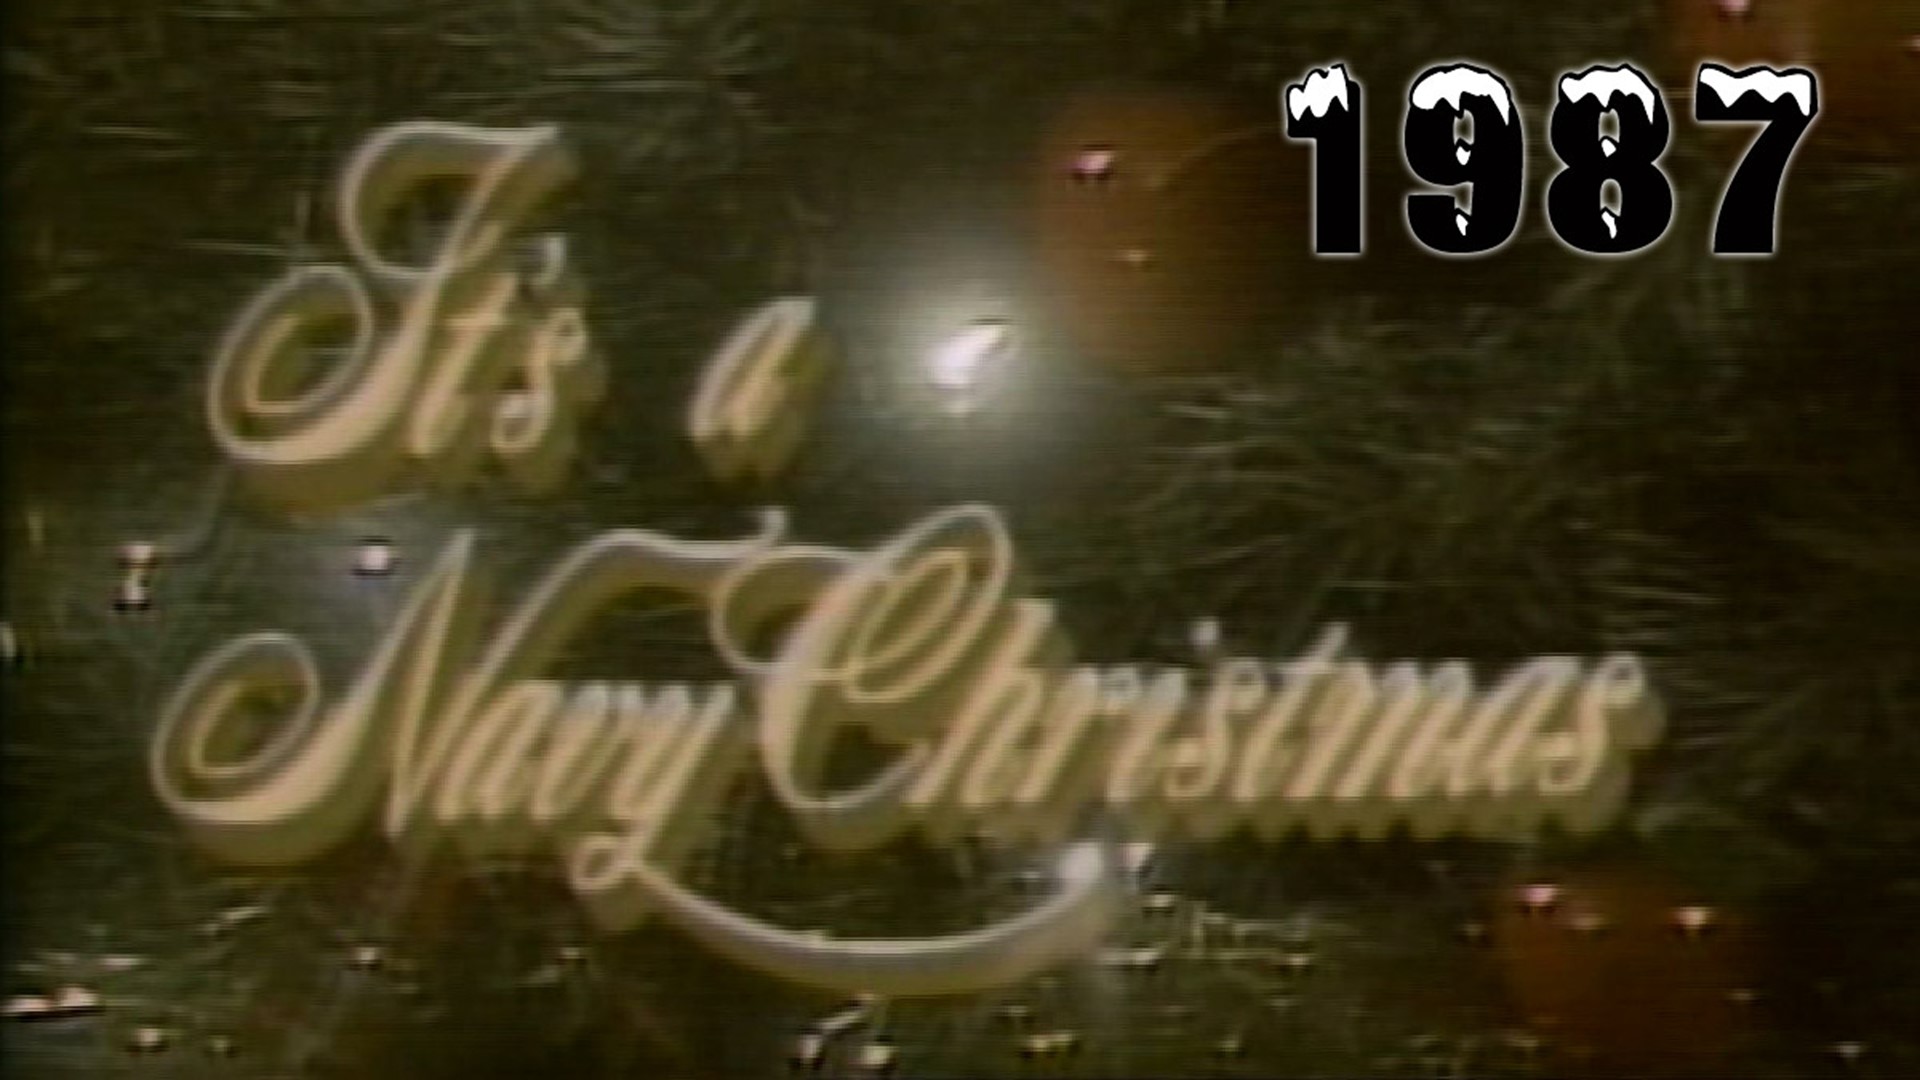 For more than 35 years, 13News Now has honored our military men and women with an annual holiday special. This is the 2nd annual Navy Christmas, which aired in 1987.